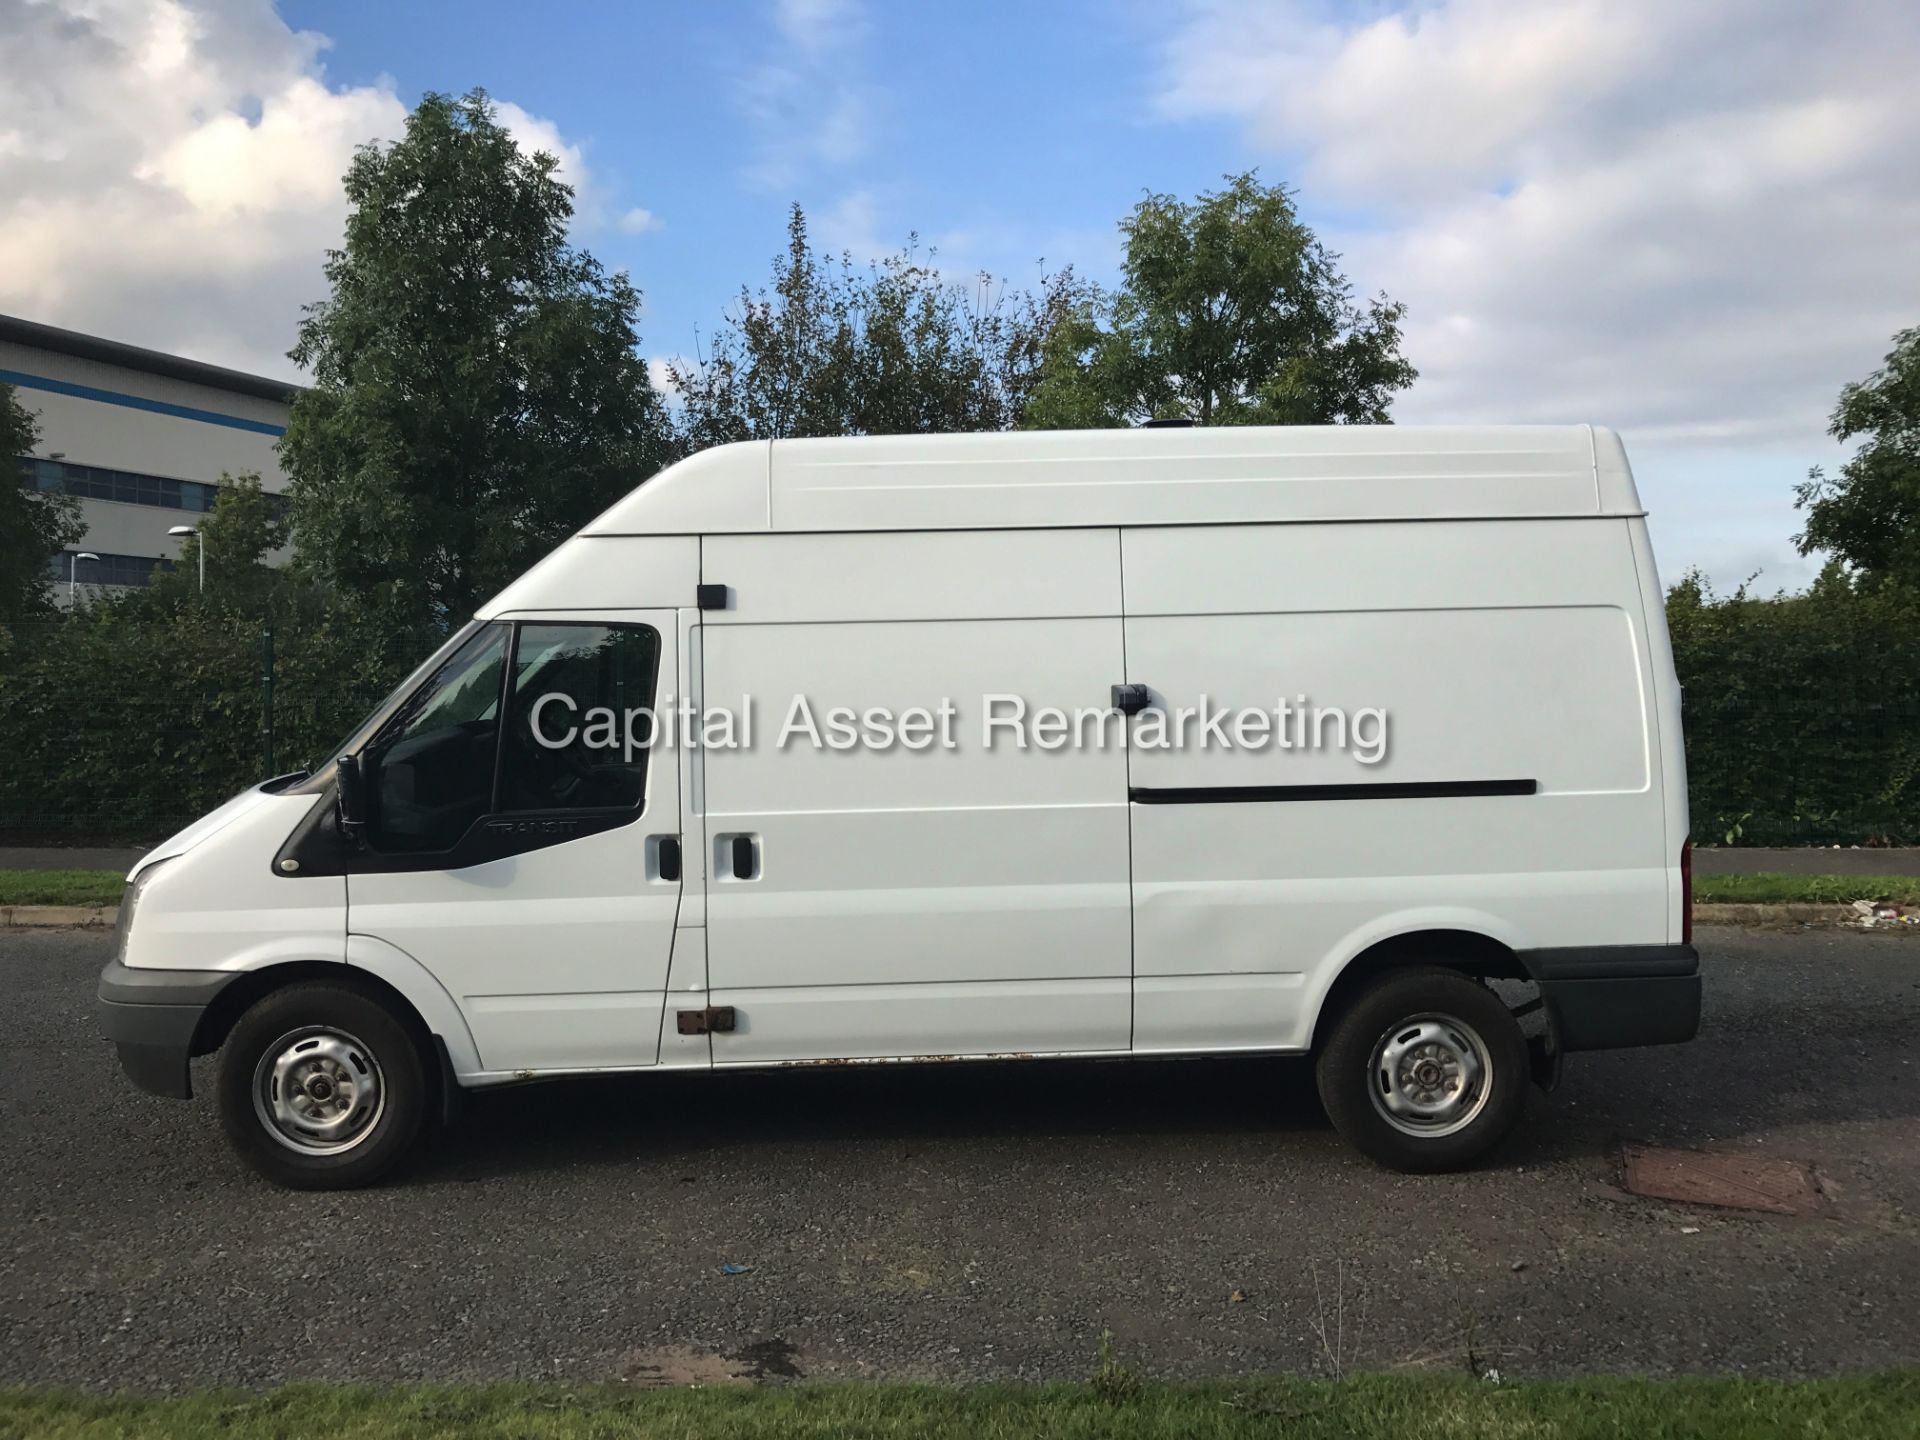 (ON SALE)FORD TRANSIT 2.4TDCI "115PSI / 6 SPEED" T350 - LWB / HIGH TOP (11 REG) LOW MILEAGE - - Image 2 of 18